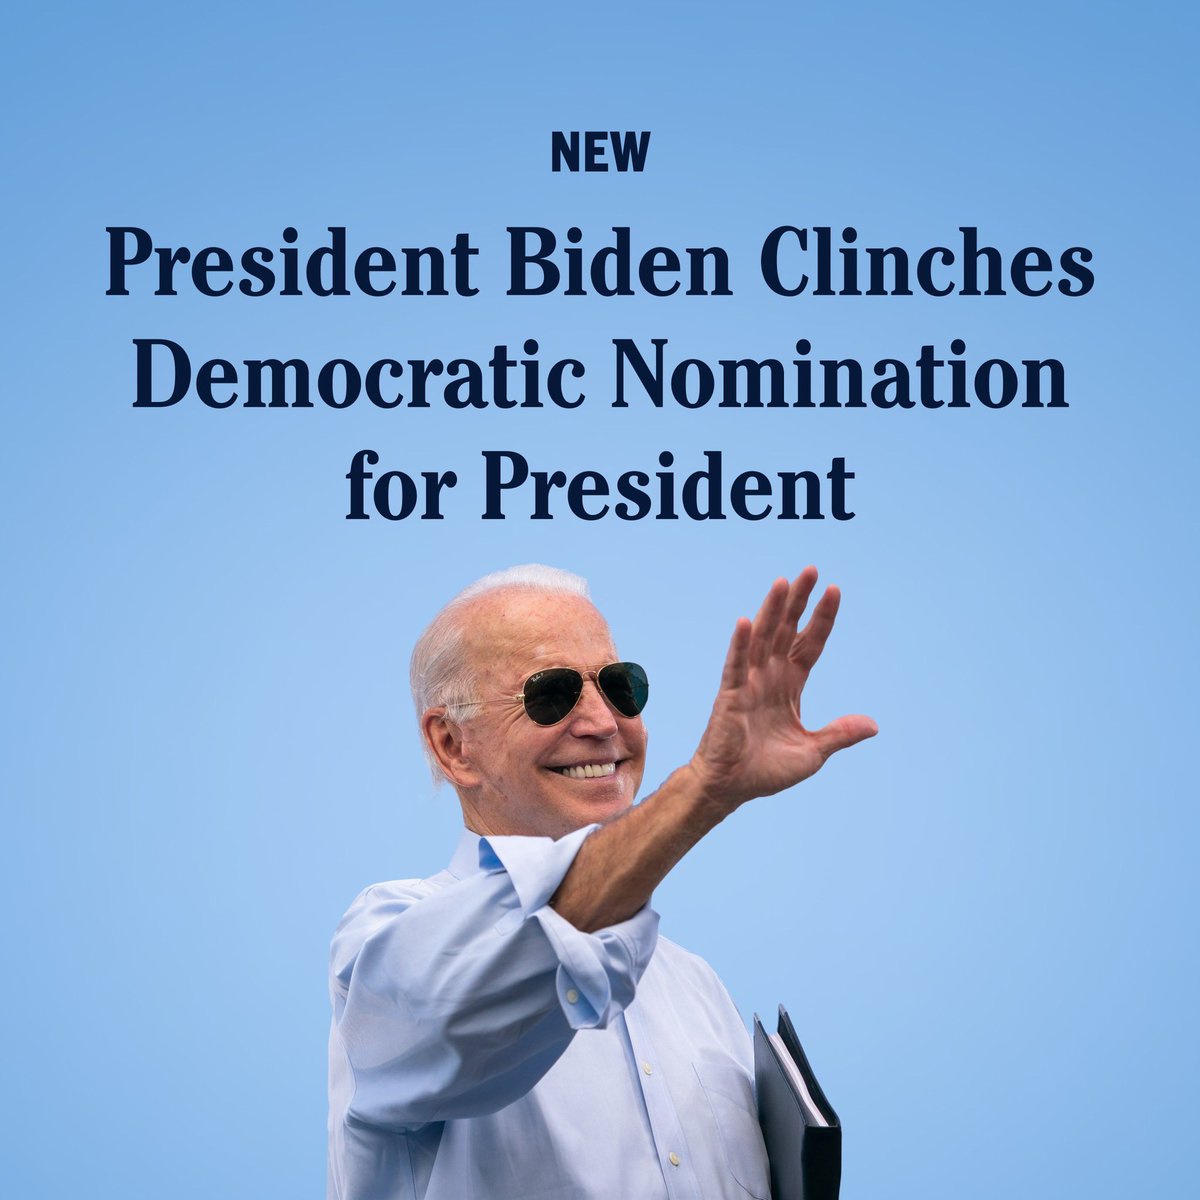 Democrats across the country—from South Carolina to Nevada, from Michigan to Georgia—have overwhelmingly chosen President Joe Biden to be our party’s presumptive nominee. Let’s finish the job!